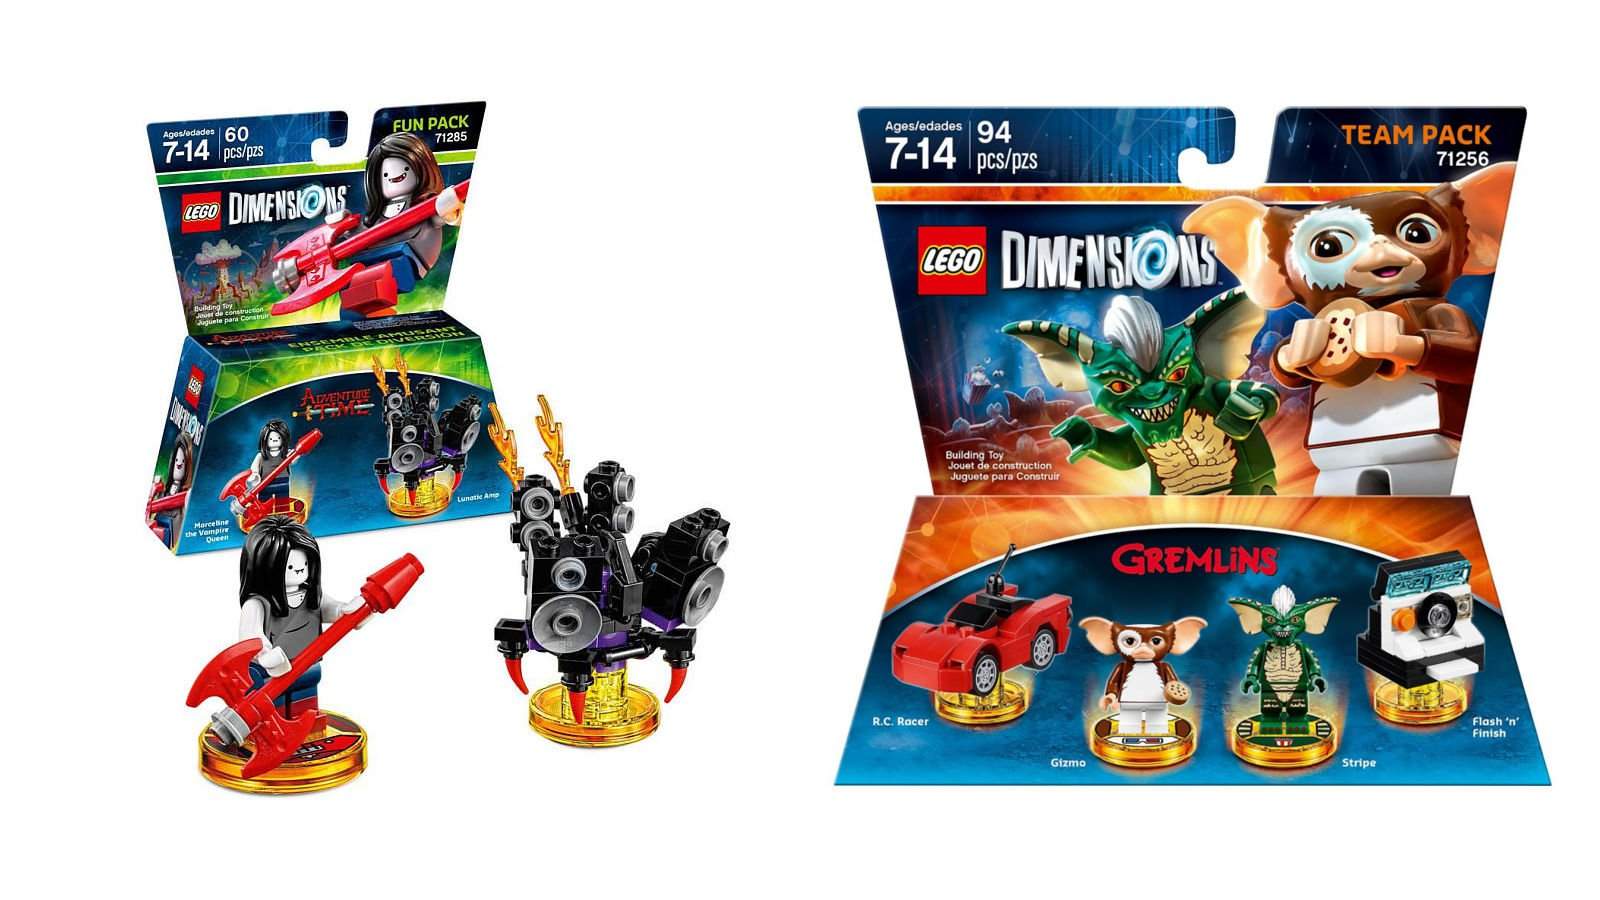 vamers-fyi-video-gaming-wave-7-of-lego-dimensions-just-released-02